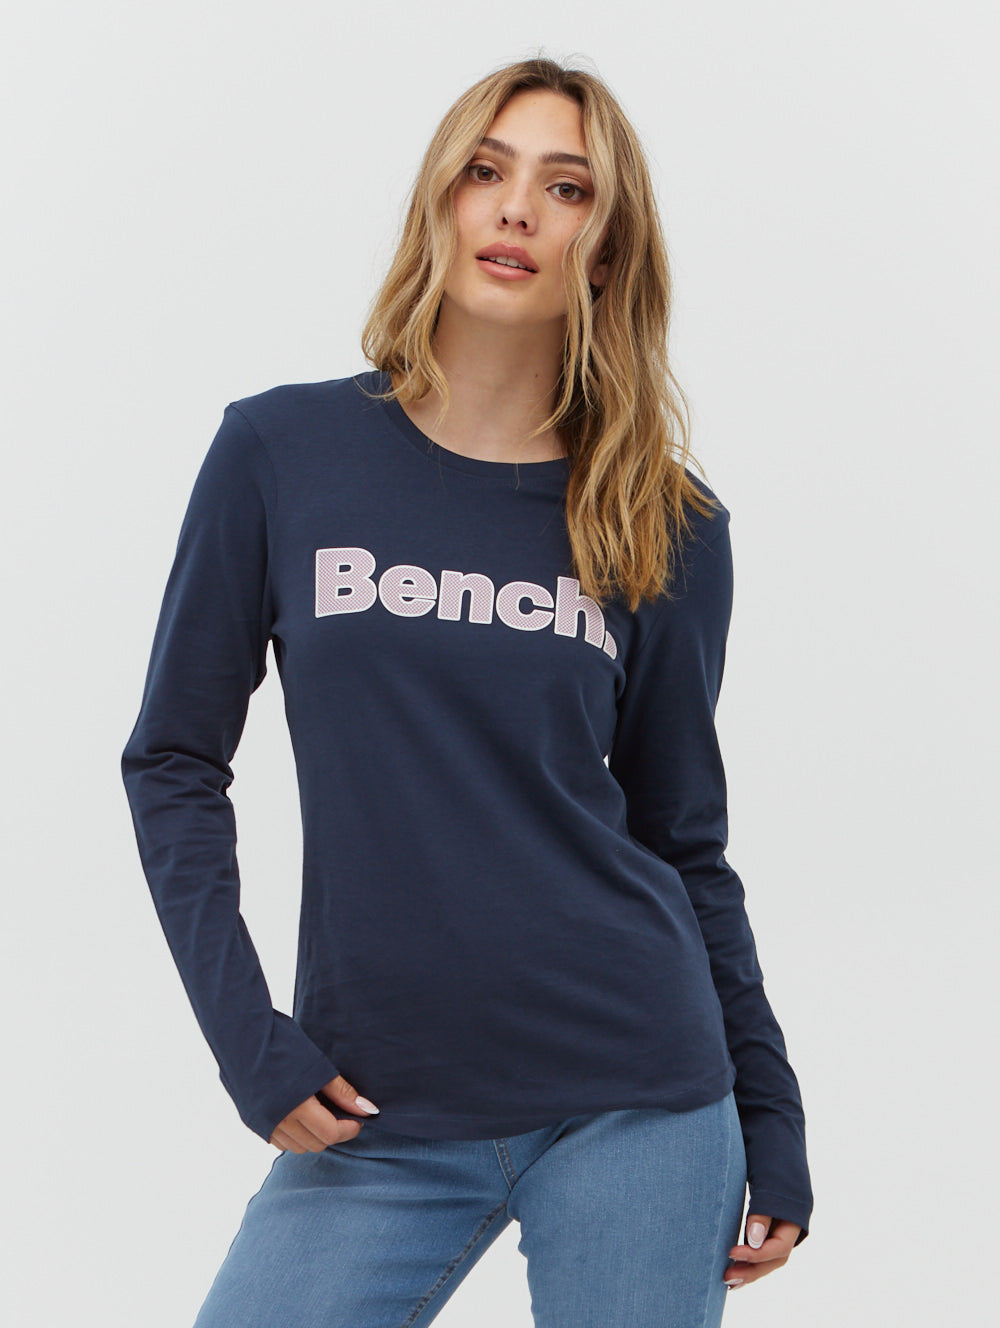 Women\'s Tops and Sweaters - Bench